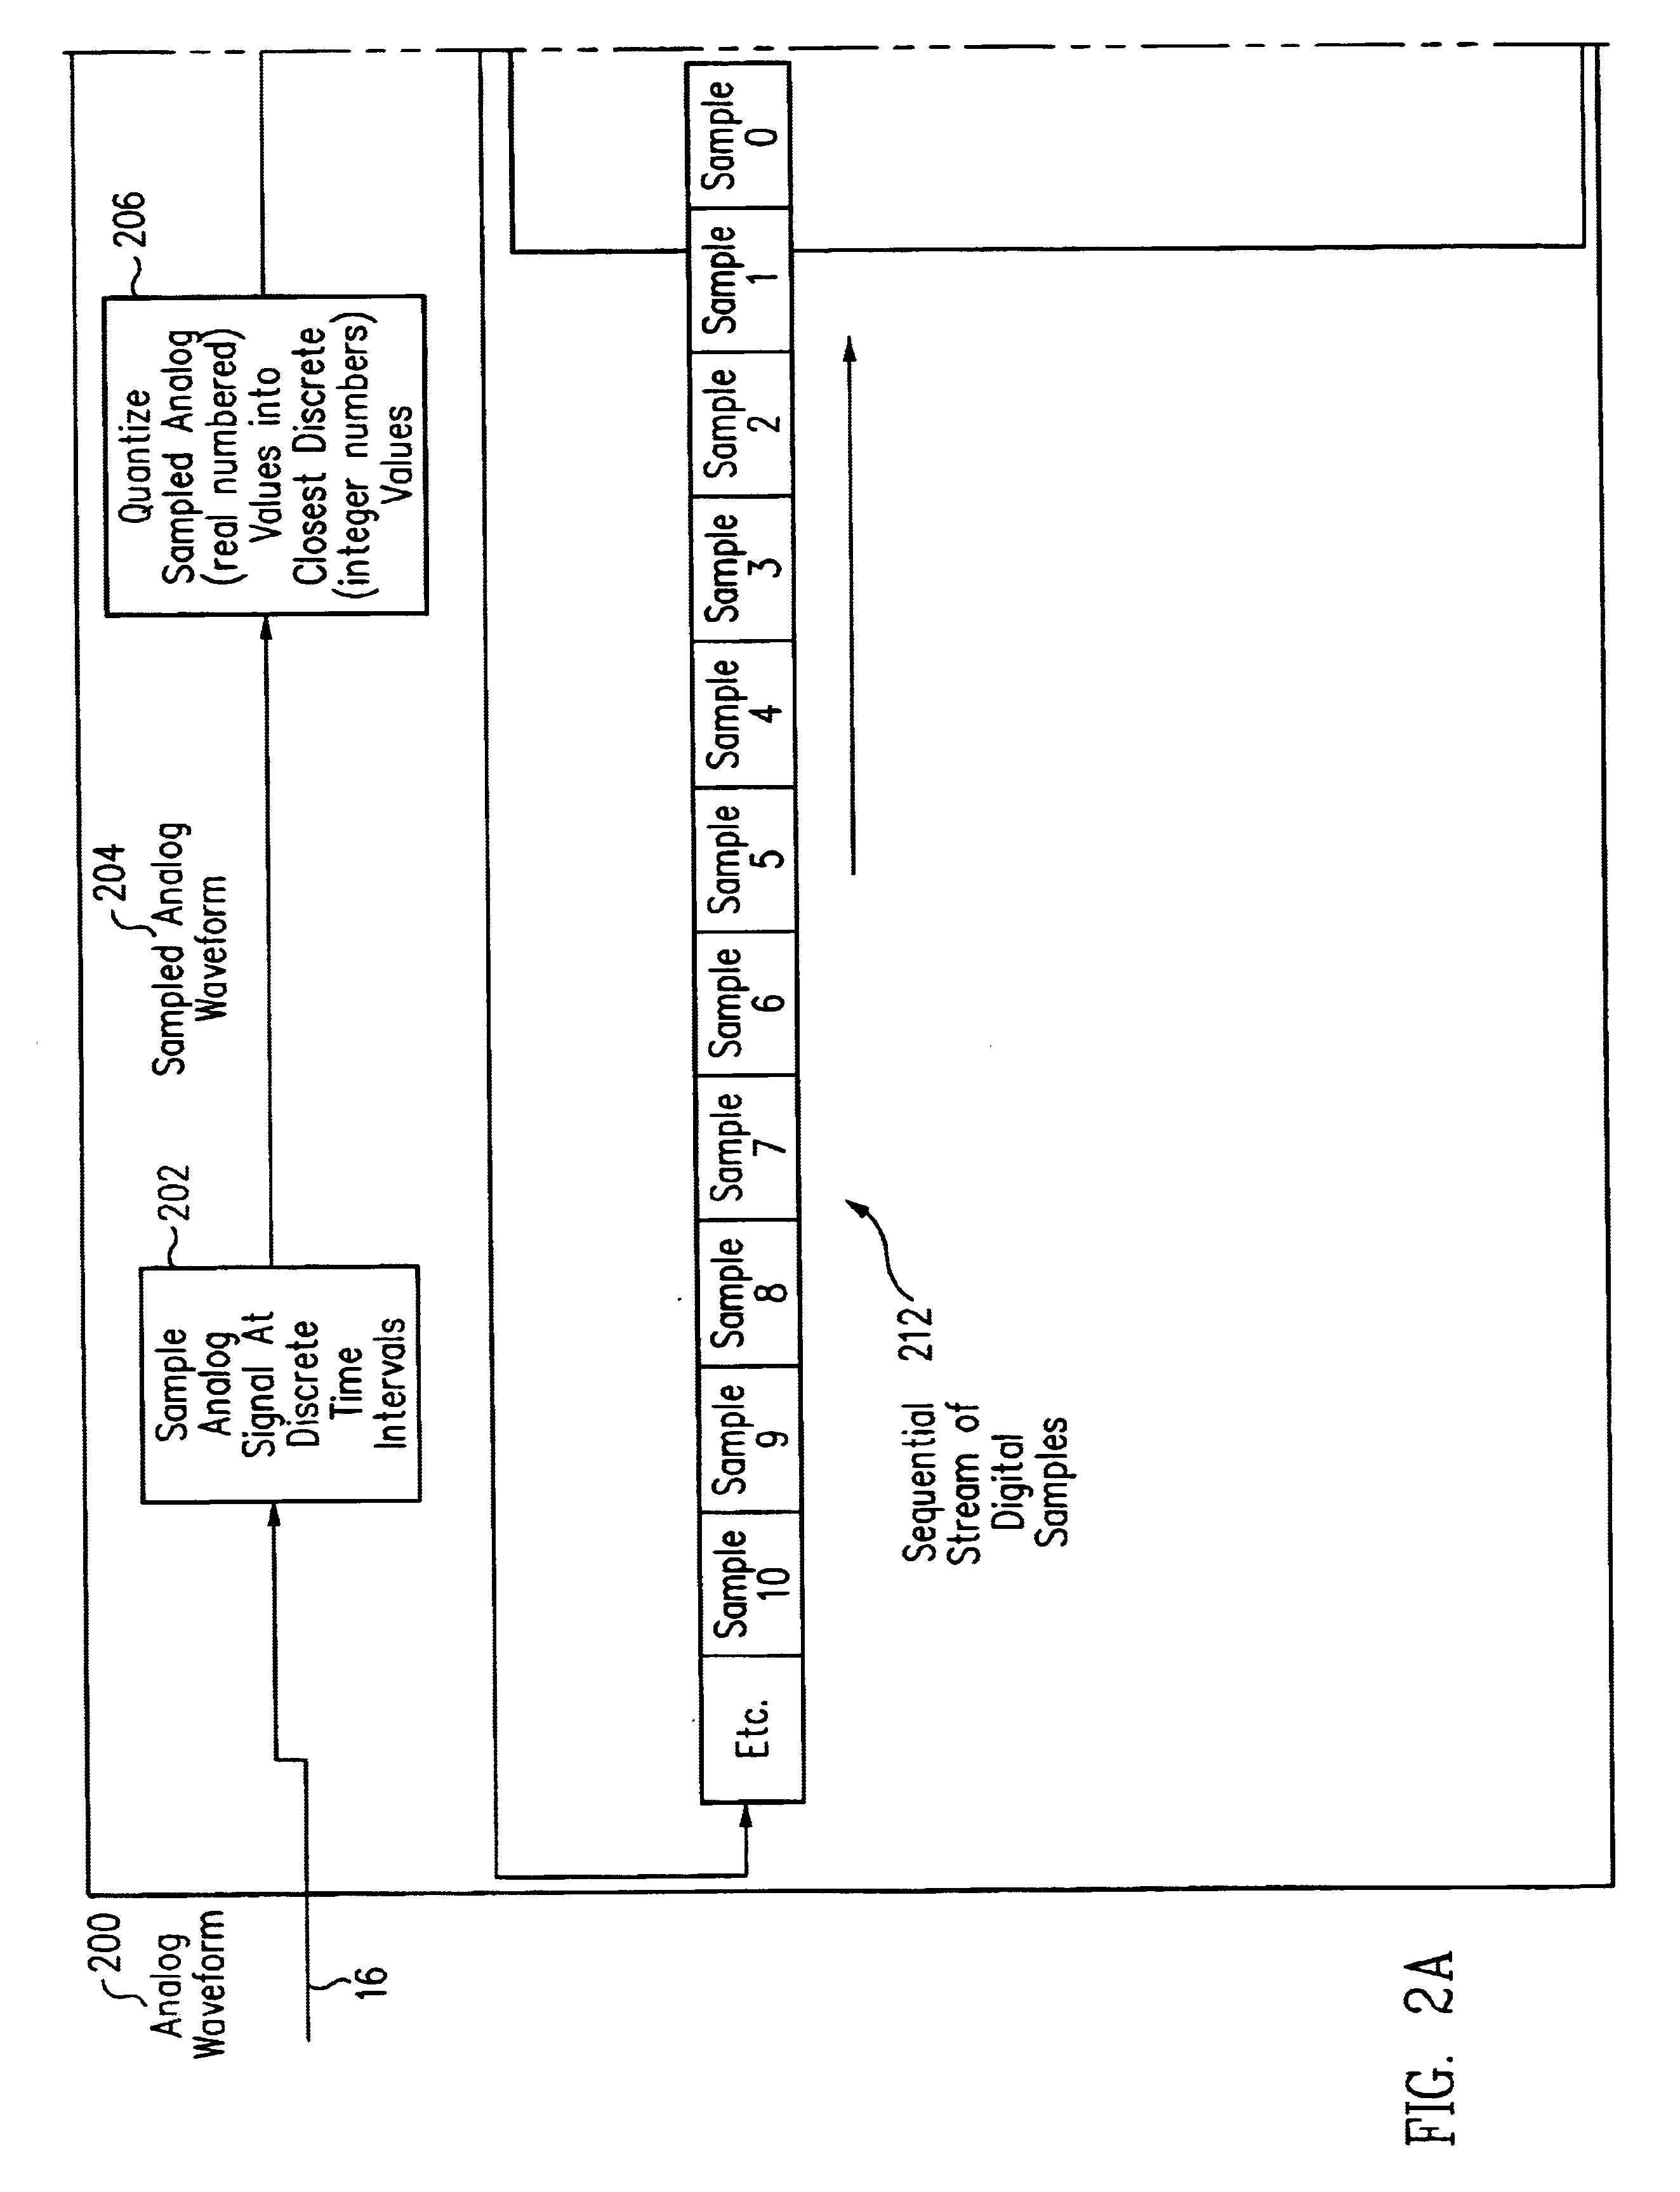 Method and system for improved analog signal detection